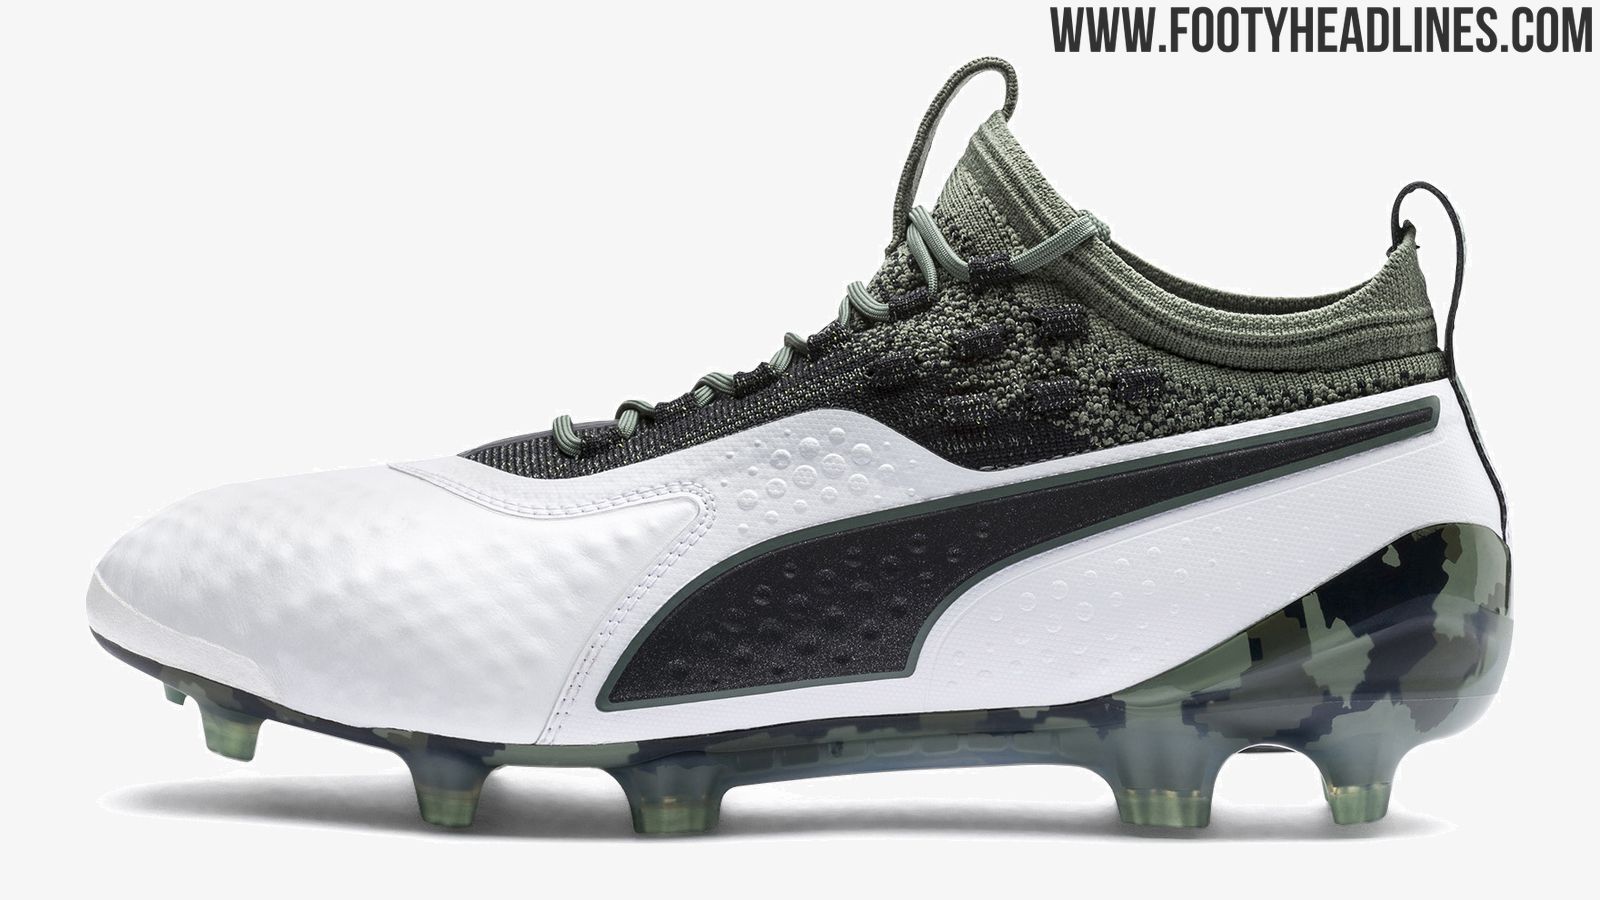 Puma ONE 'Attack Pack' 2018-19 Released - Headlines